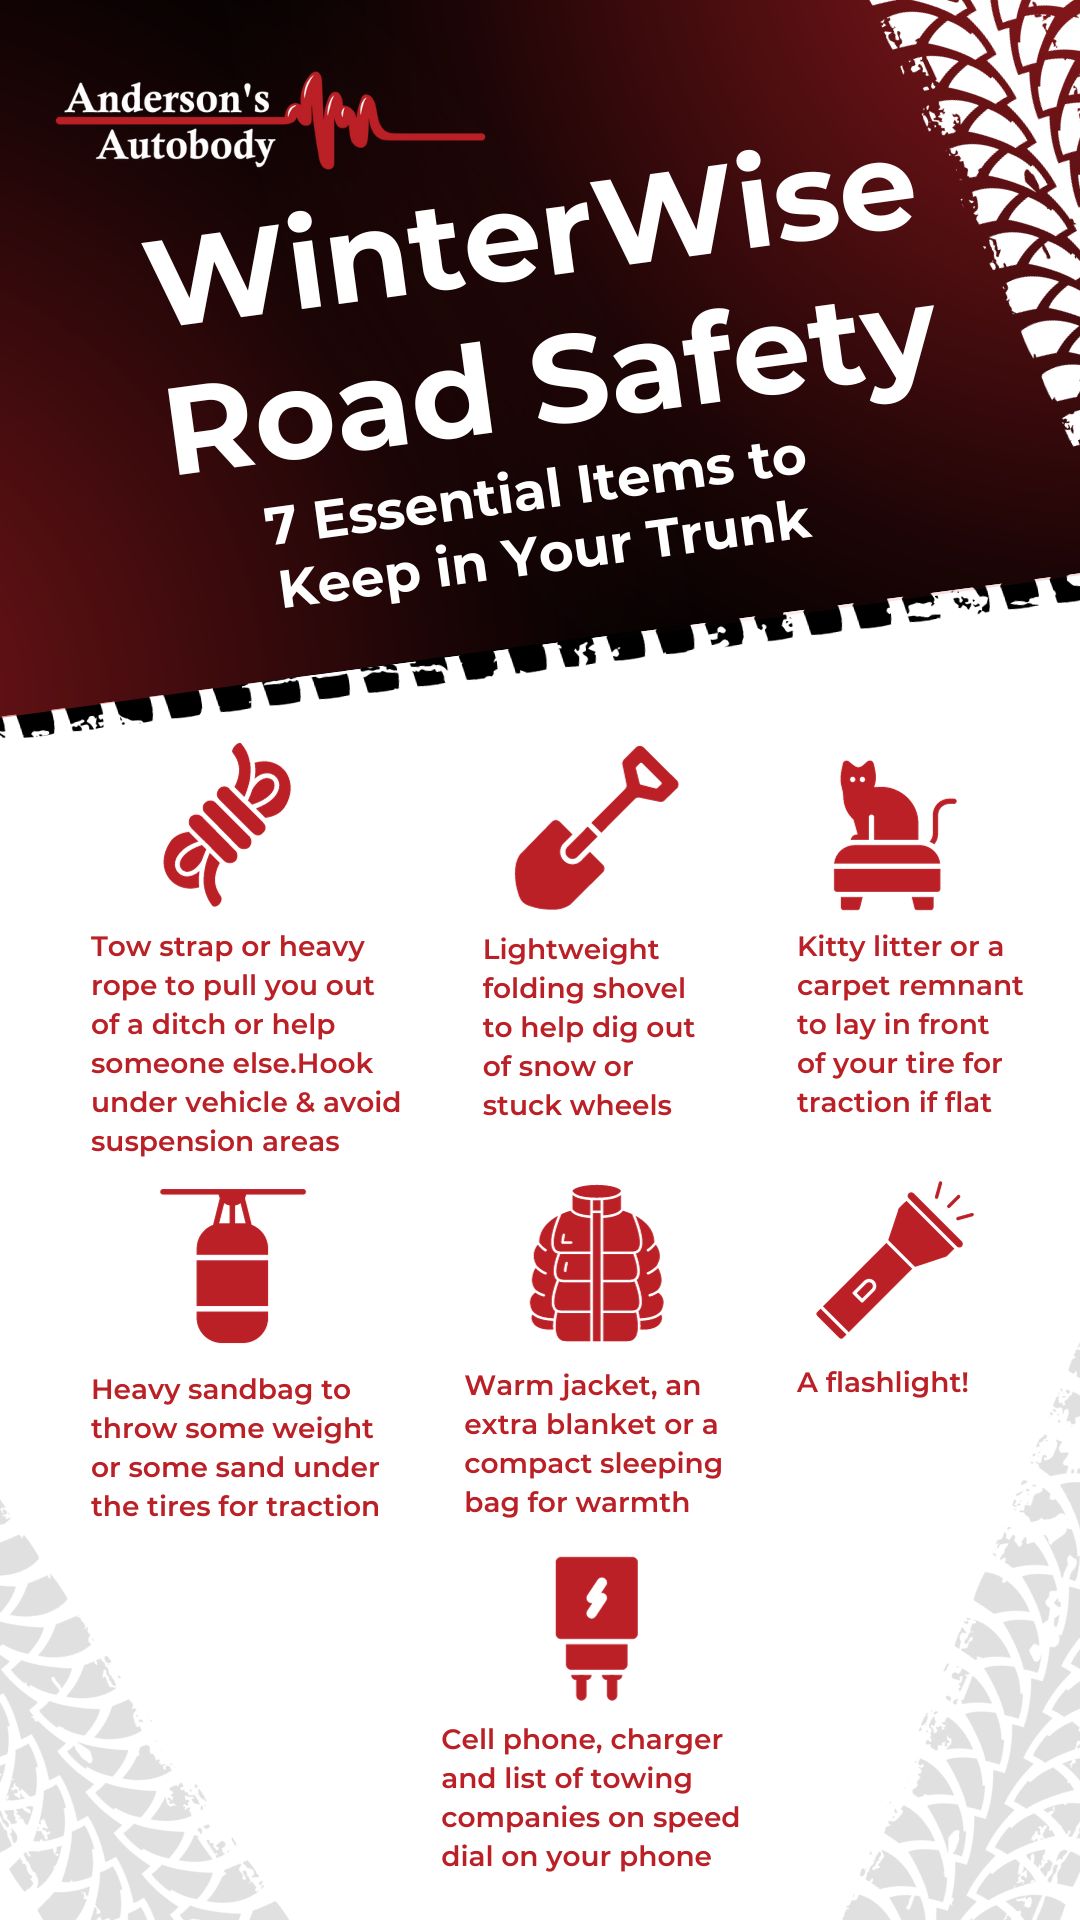 Great list of items to carry in your truck or car during winter in Idaho if you slide off the road